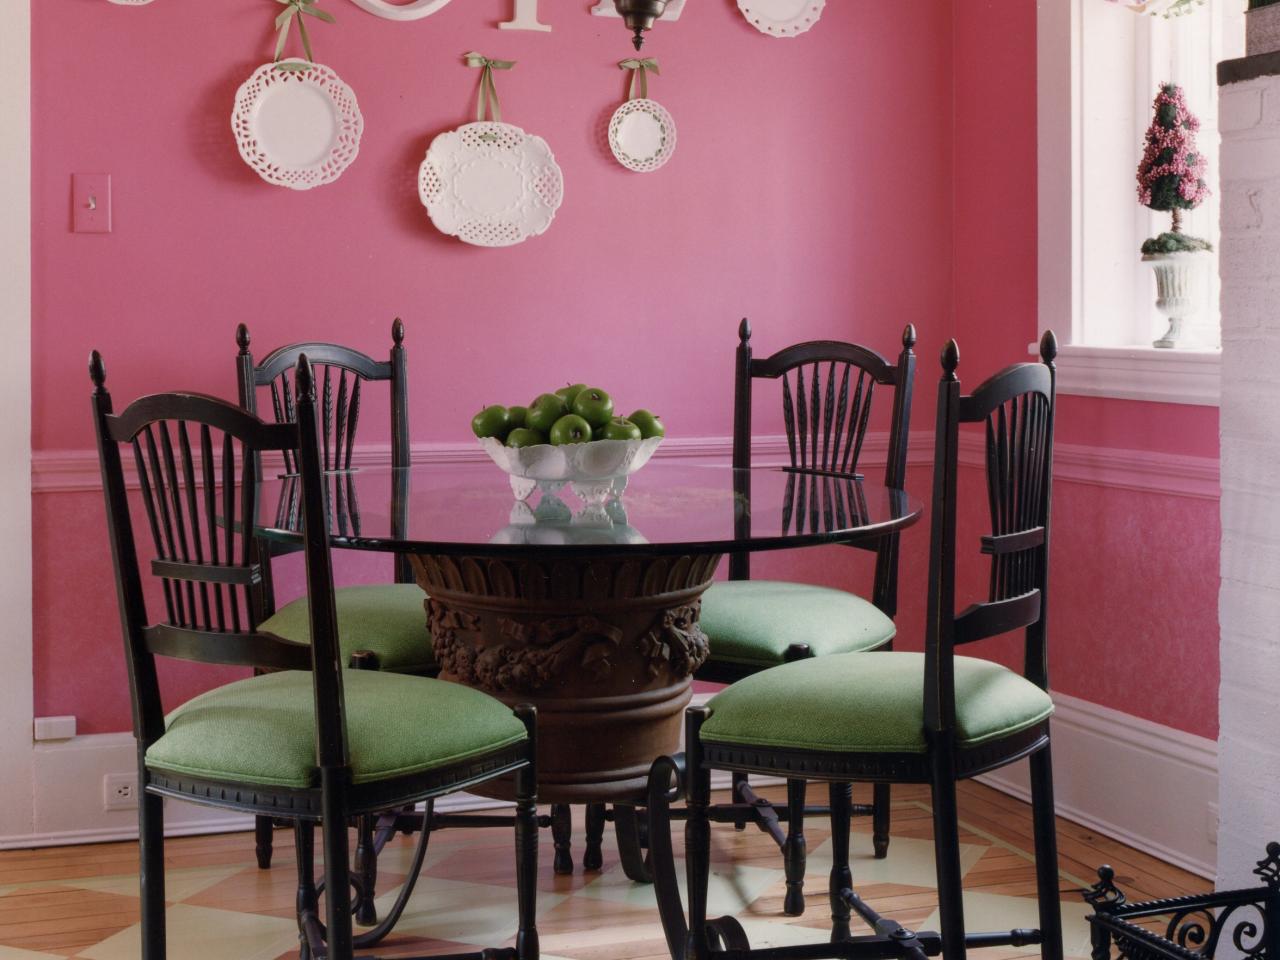 Top 10 Tips For Adding Color To Your Space Hgtv pertaining to Home Design With Color